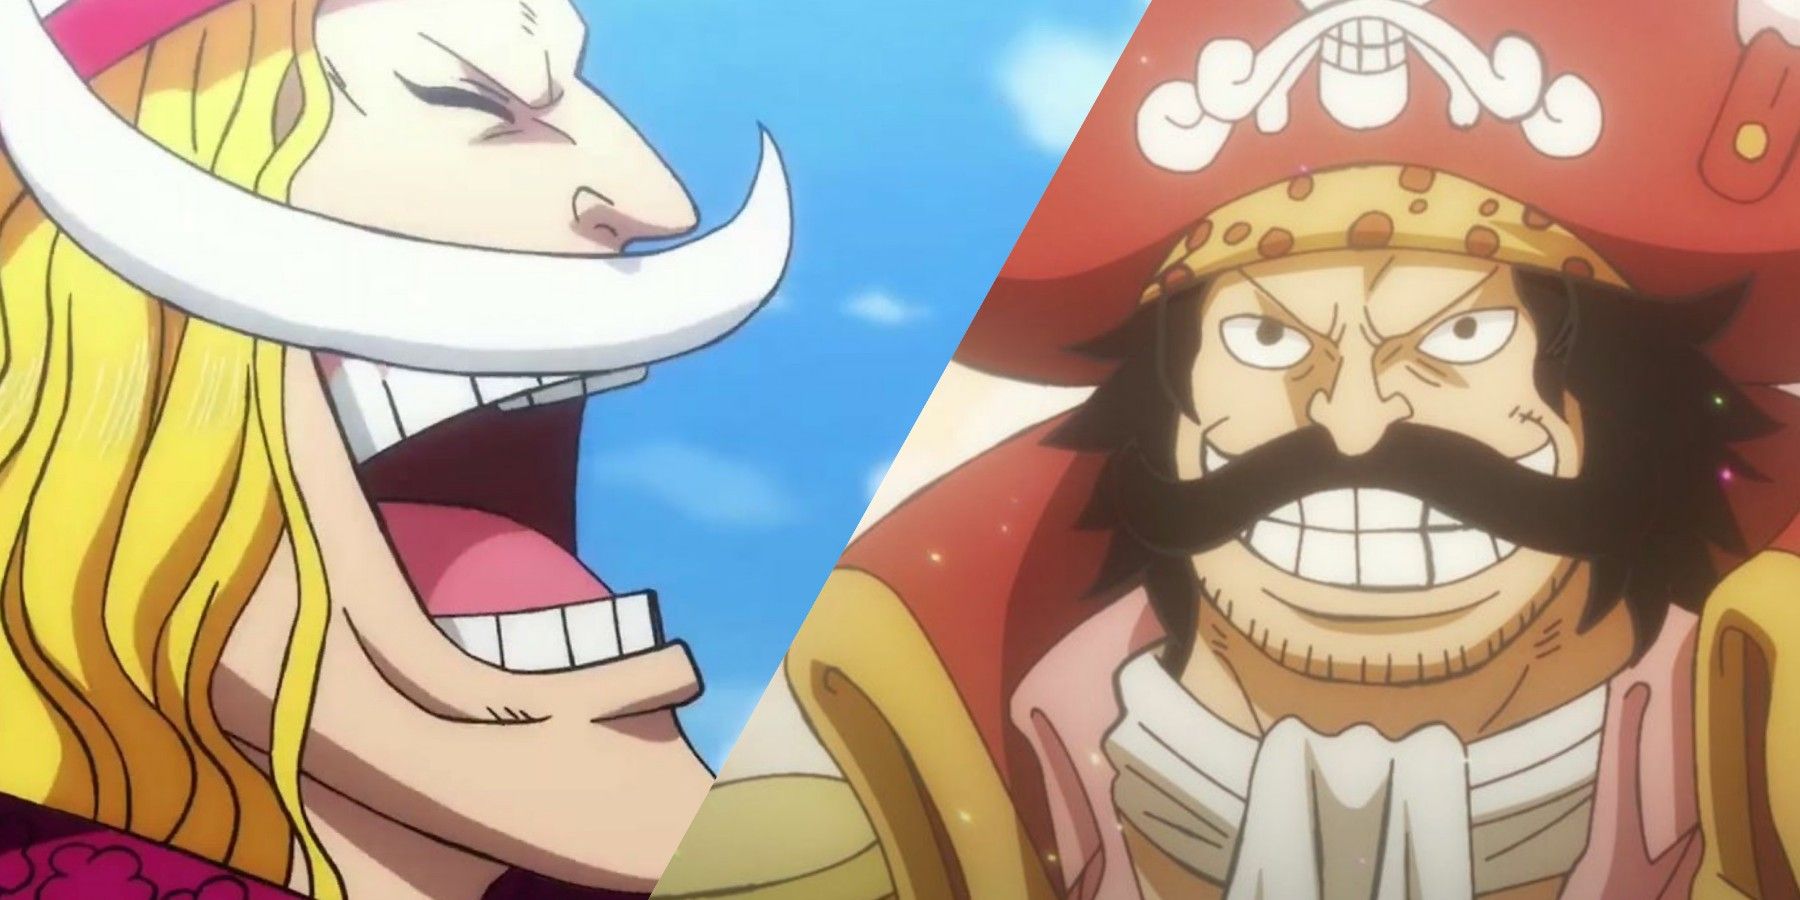 Which character in One Piece has overvalued bounties? - Quora